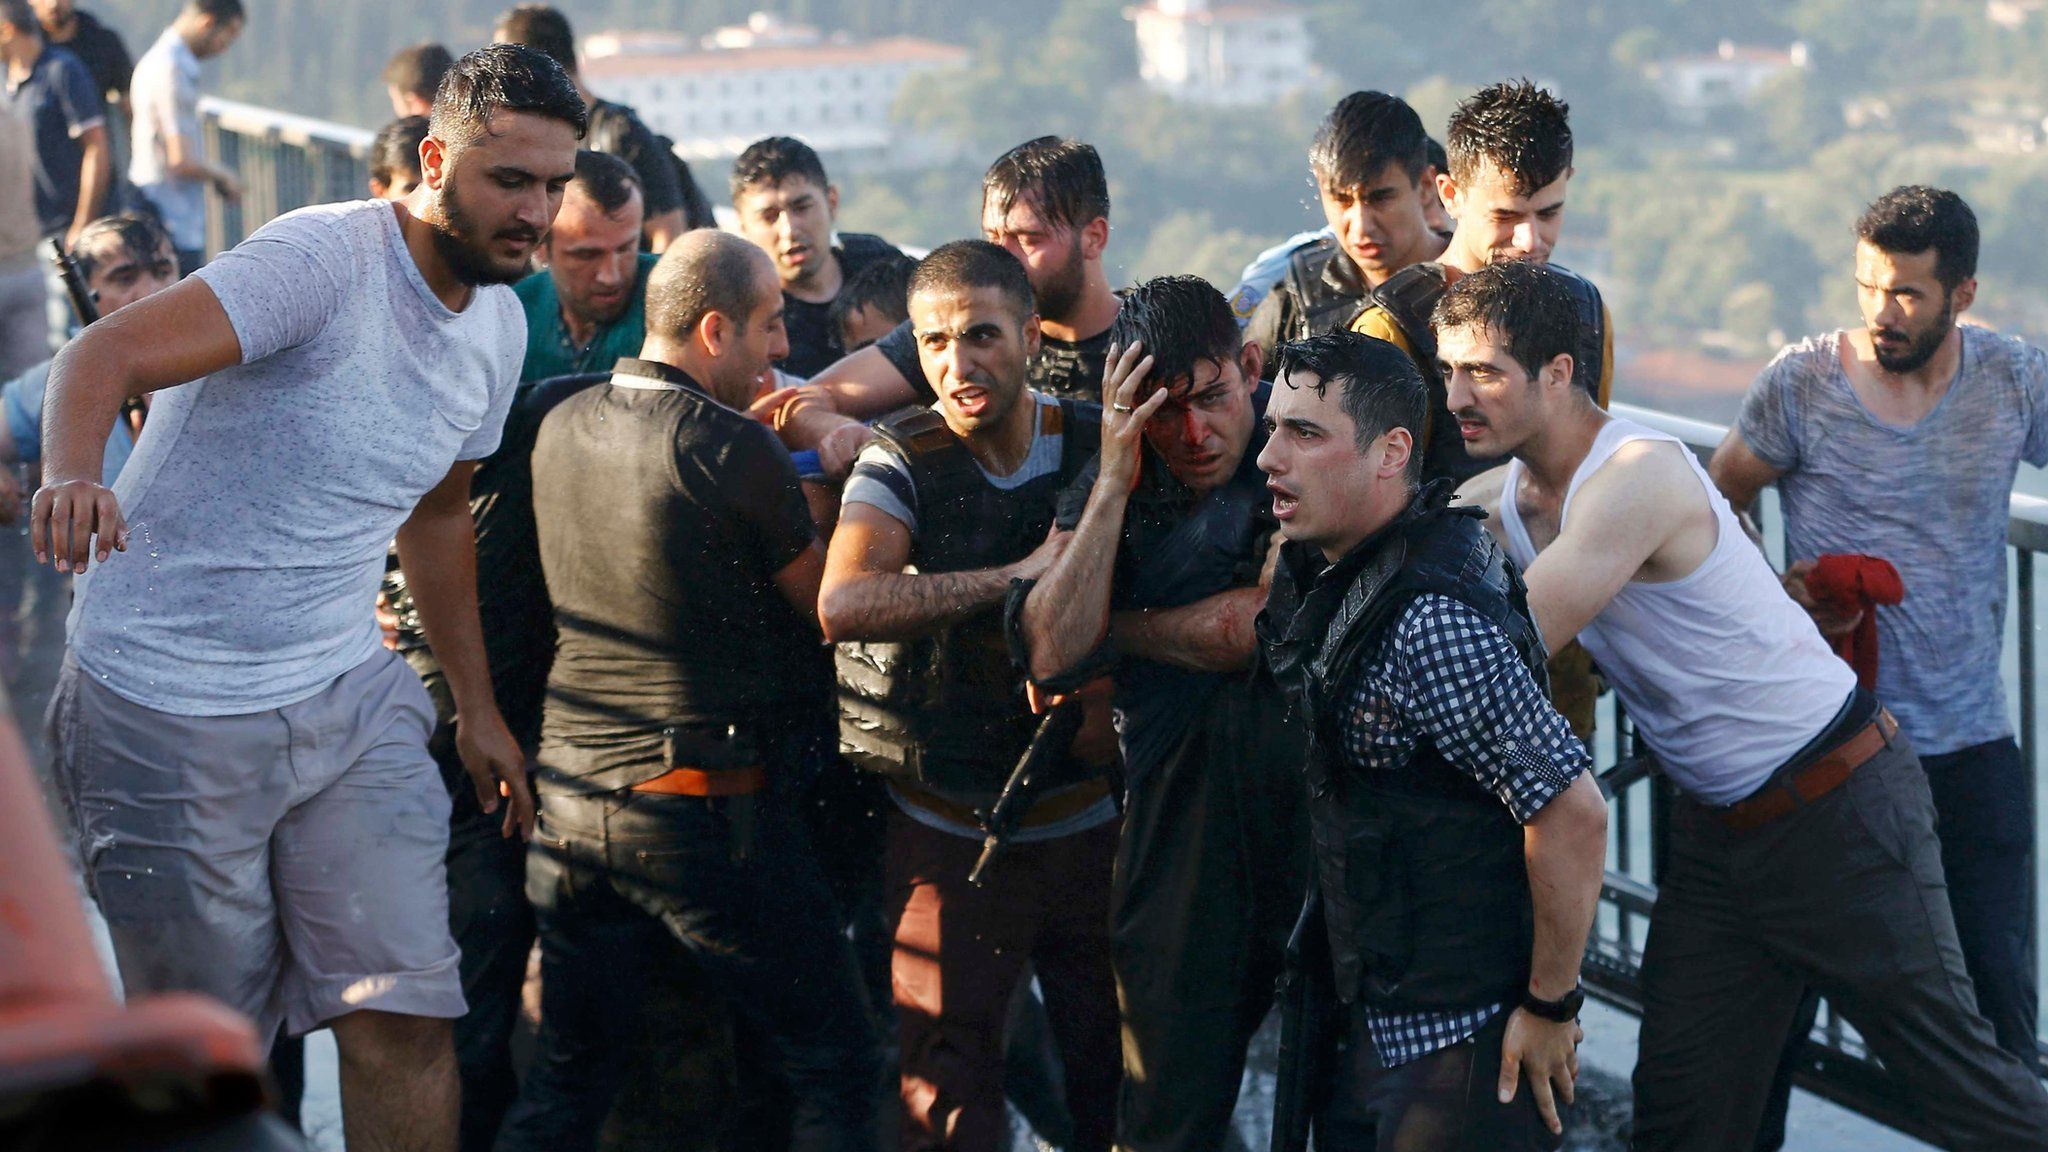 Policemen protect a soldier from a mob on the Bosphorus bridge in Istanbul on 16 July 2016